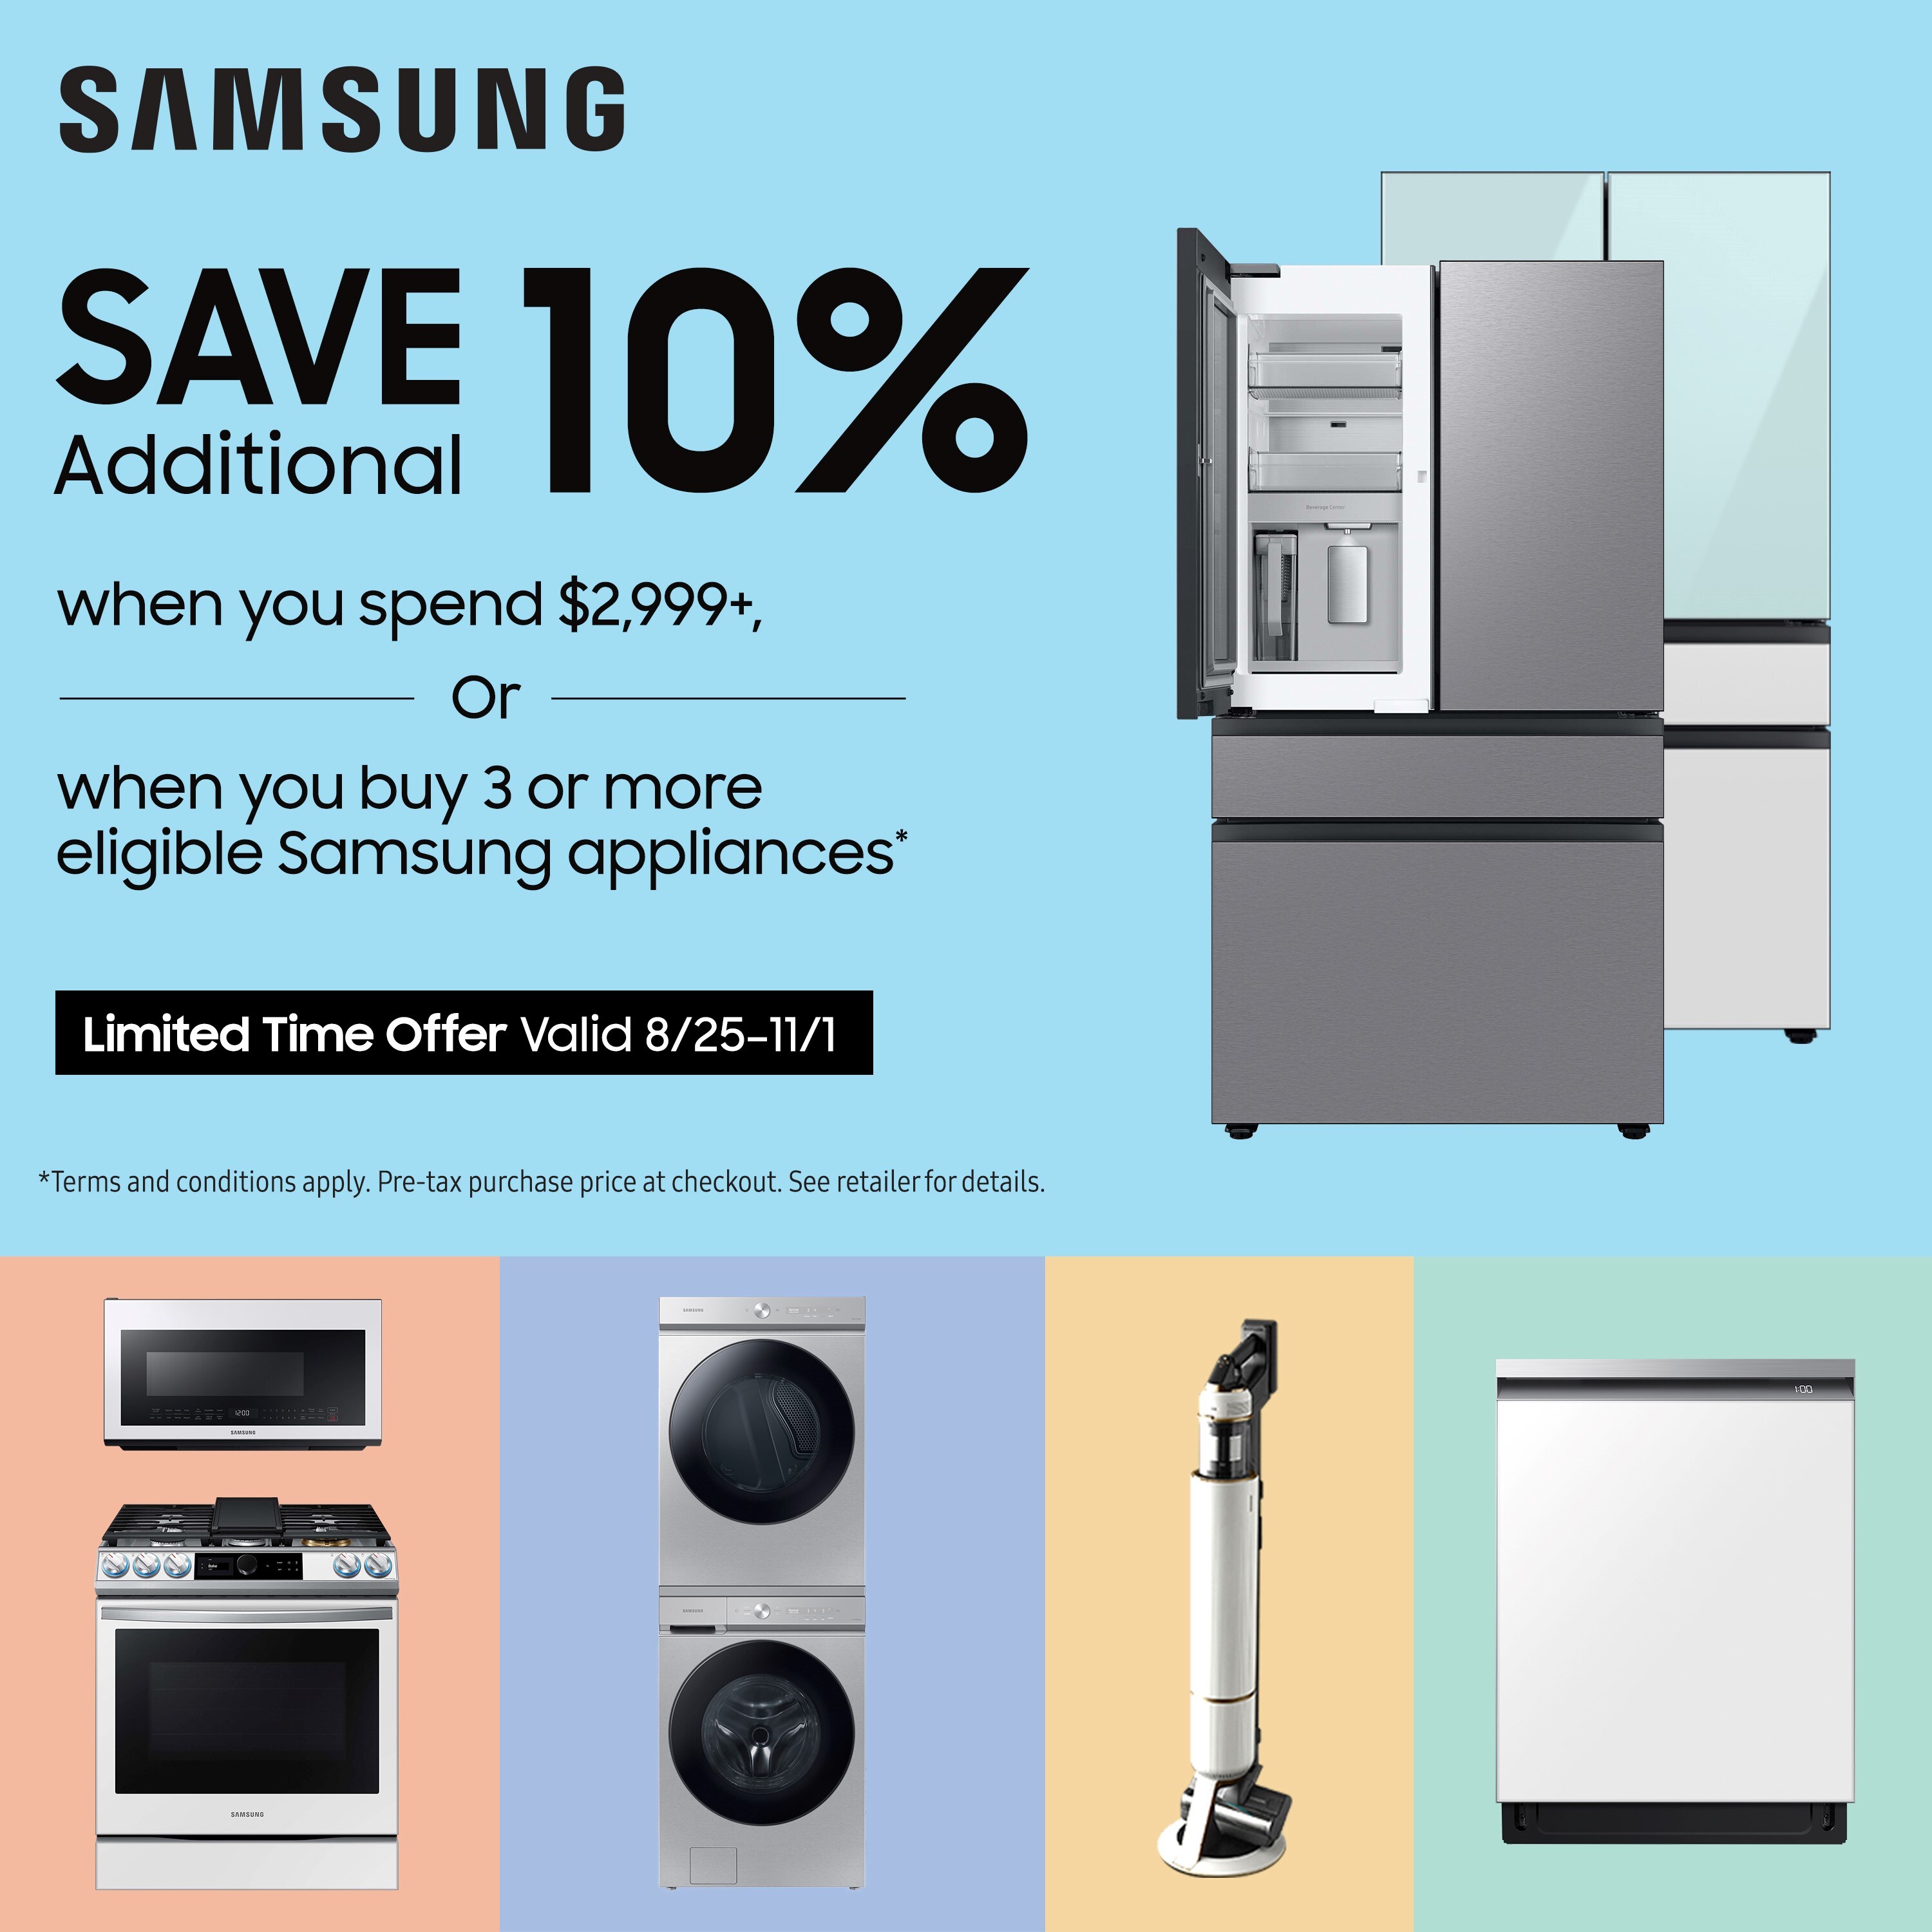 Samsung Bespoke 30 1 Cu Ft French Door Refrigerator With Dual Ice Maker And Door Within Door Stainless Steel All Panels Energy Star In The French Door Refrigerators Department At Lowes Com